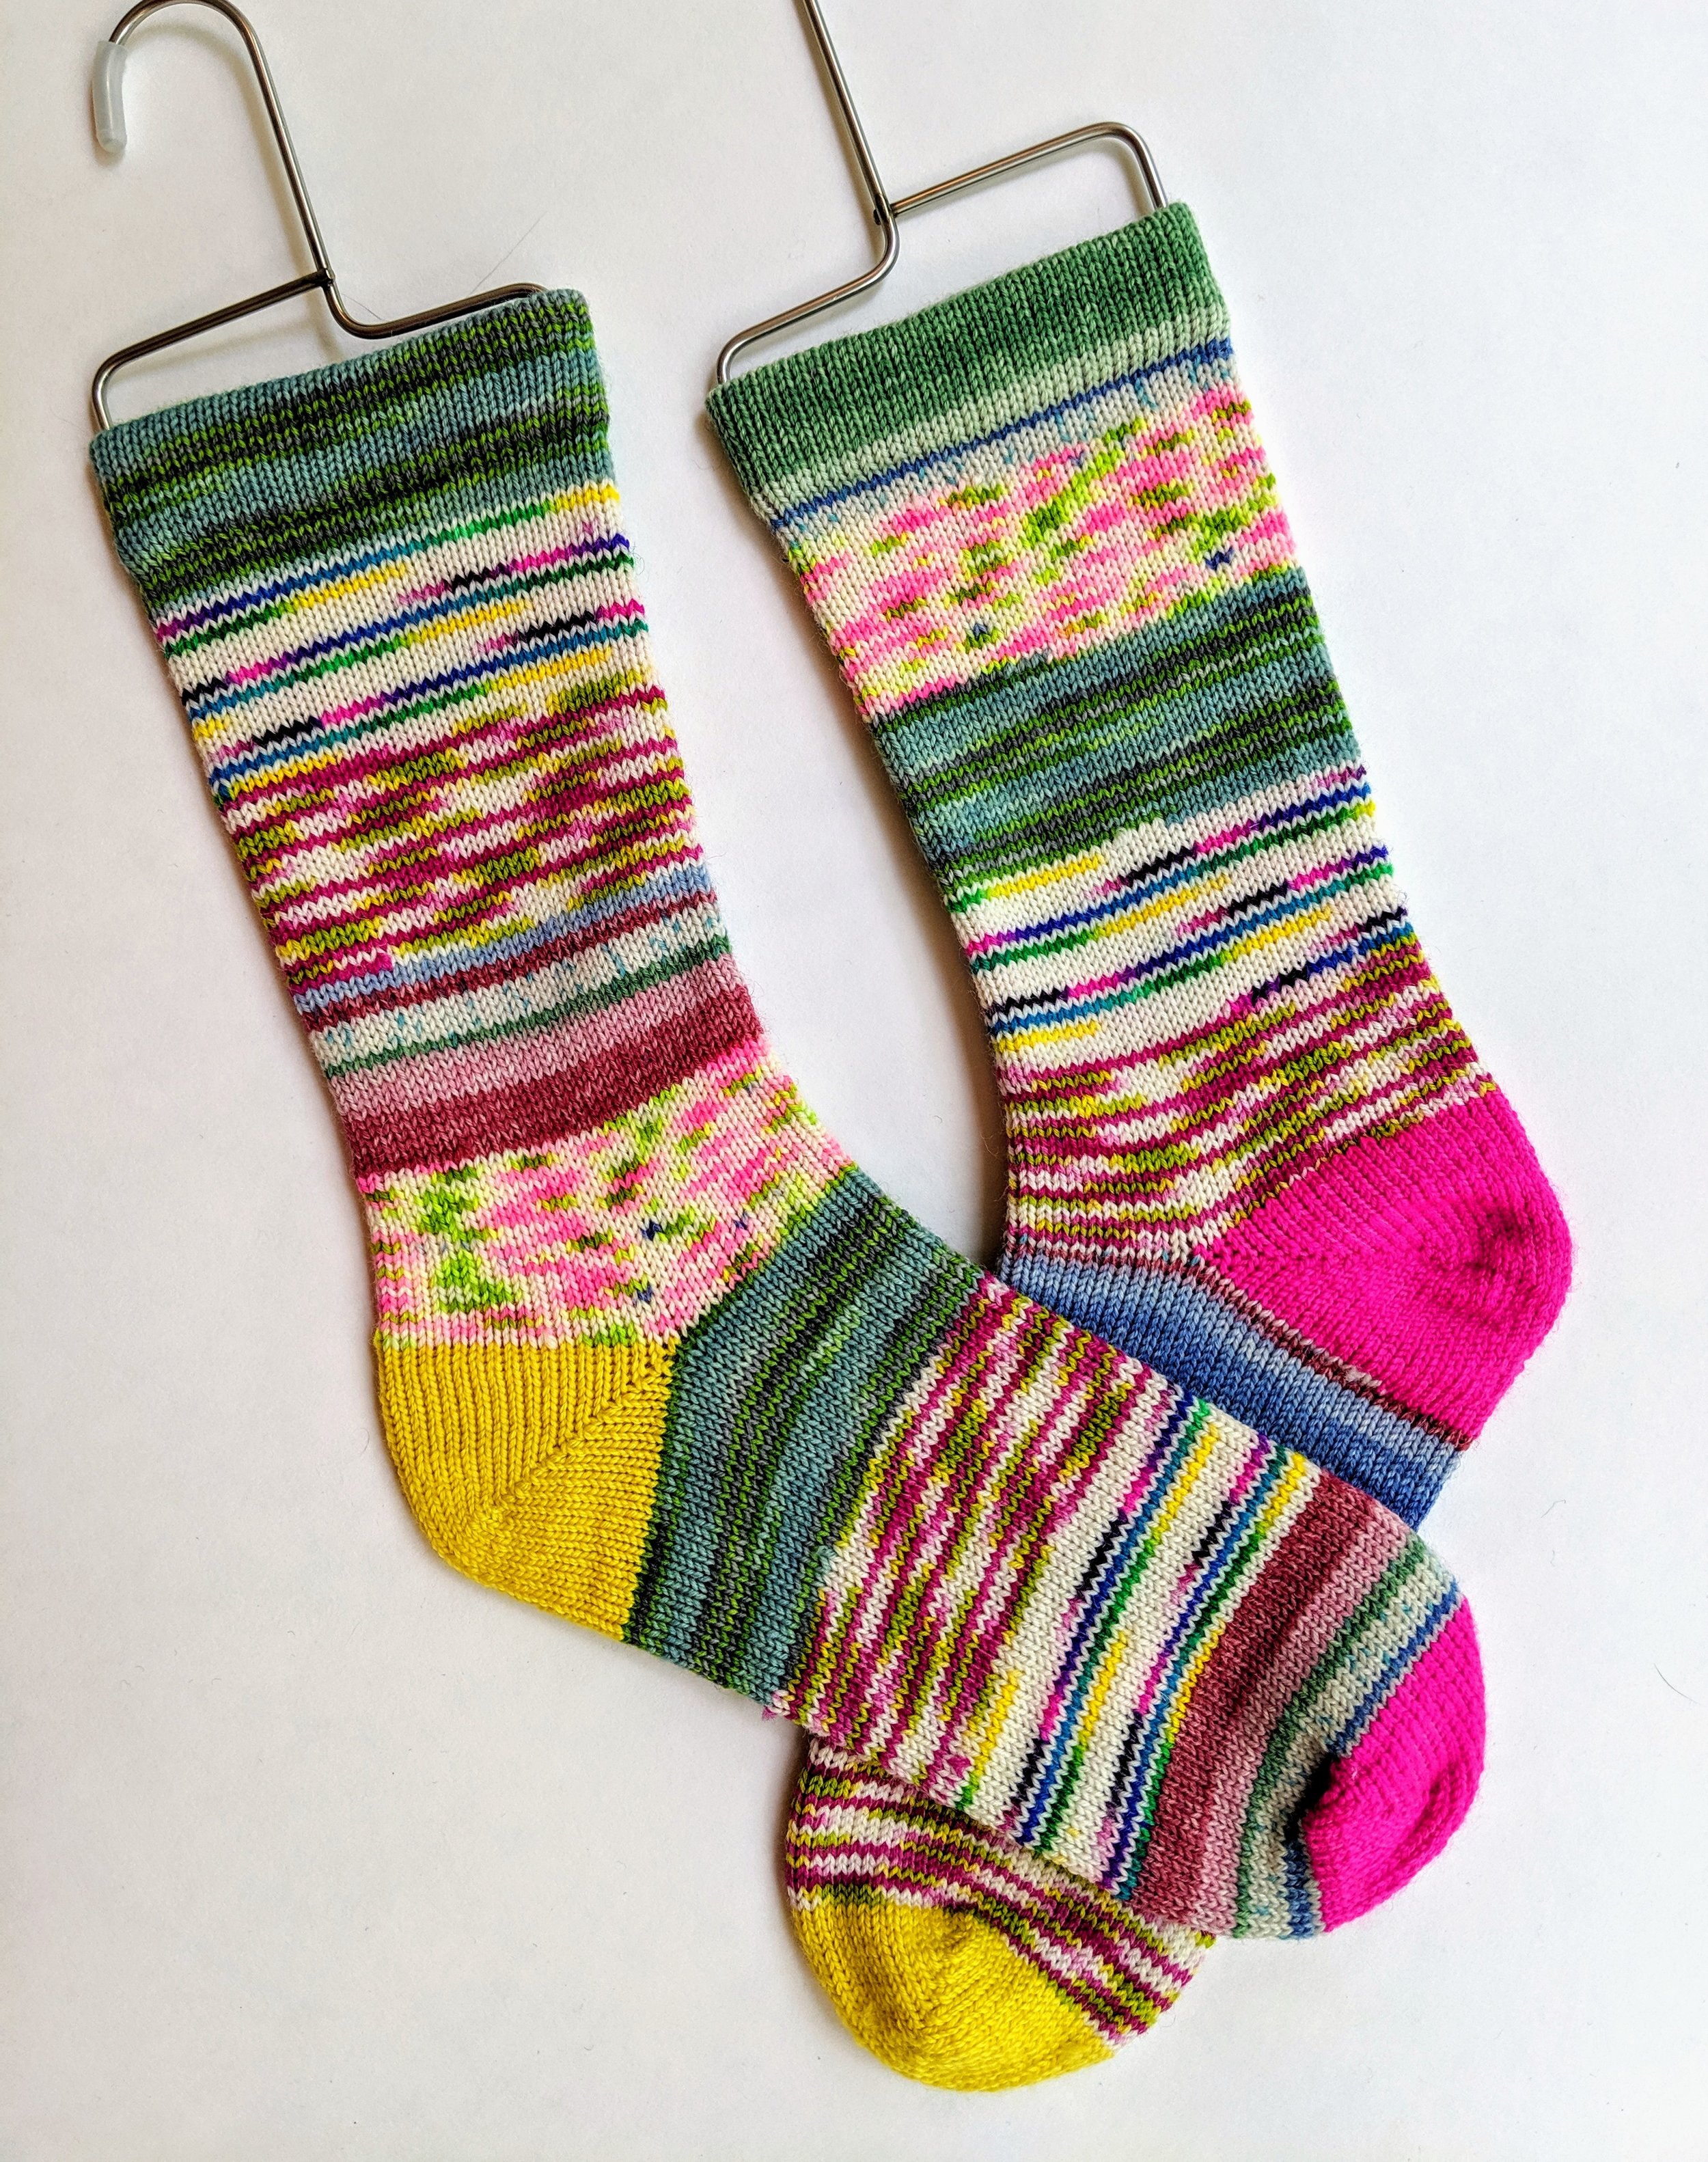 "Frankensocks" (made from yarn leftovers); wool and nylon